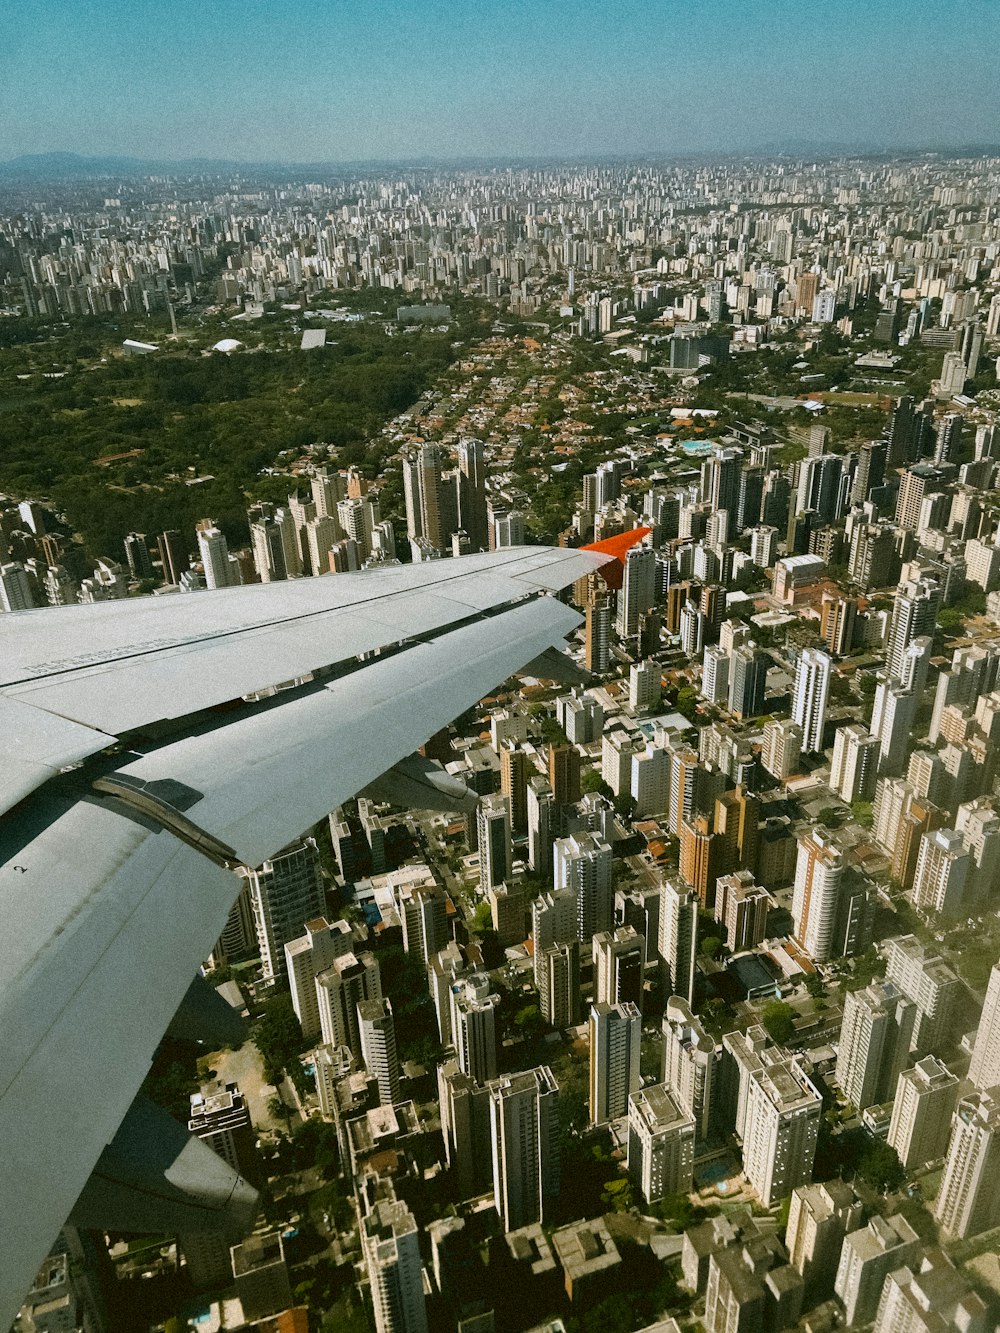 a view of a city from an airplane